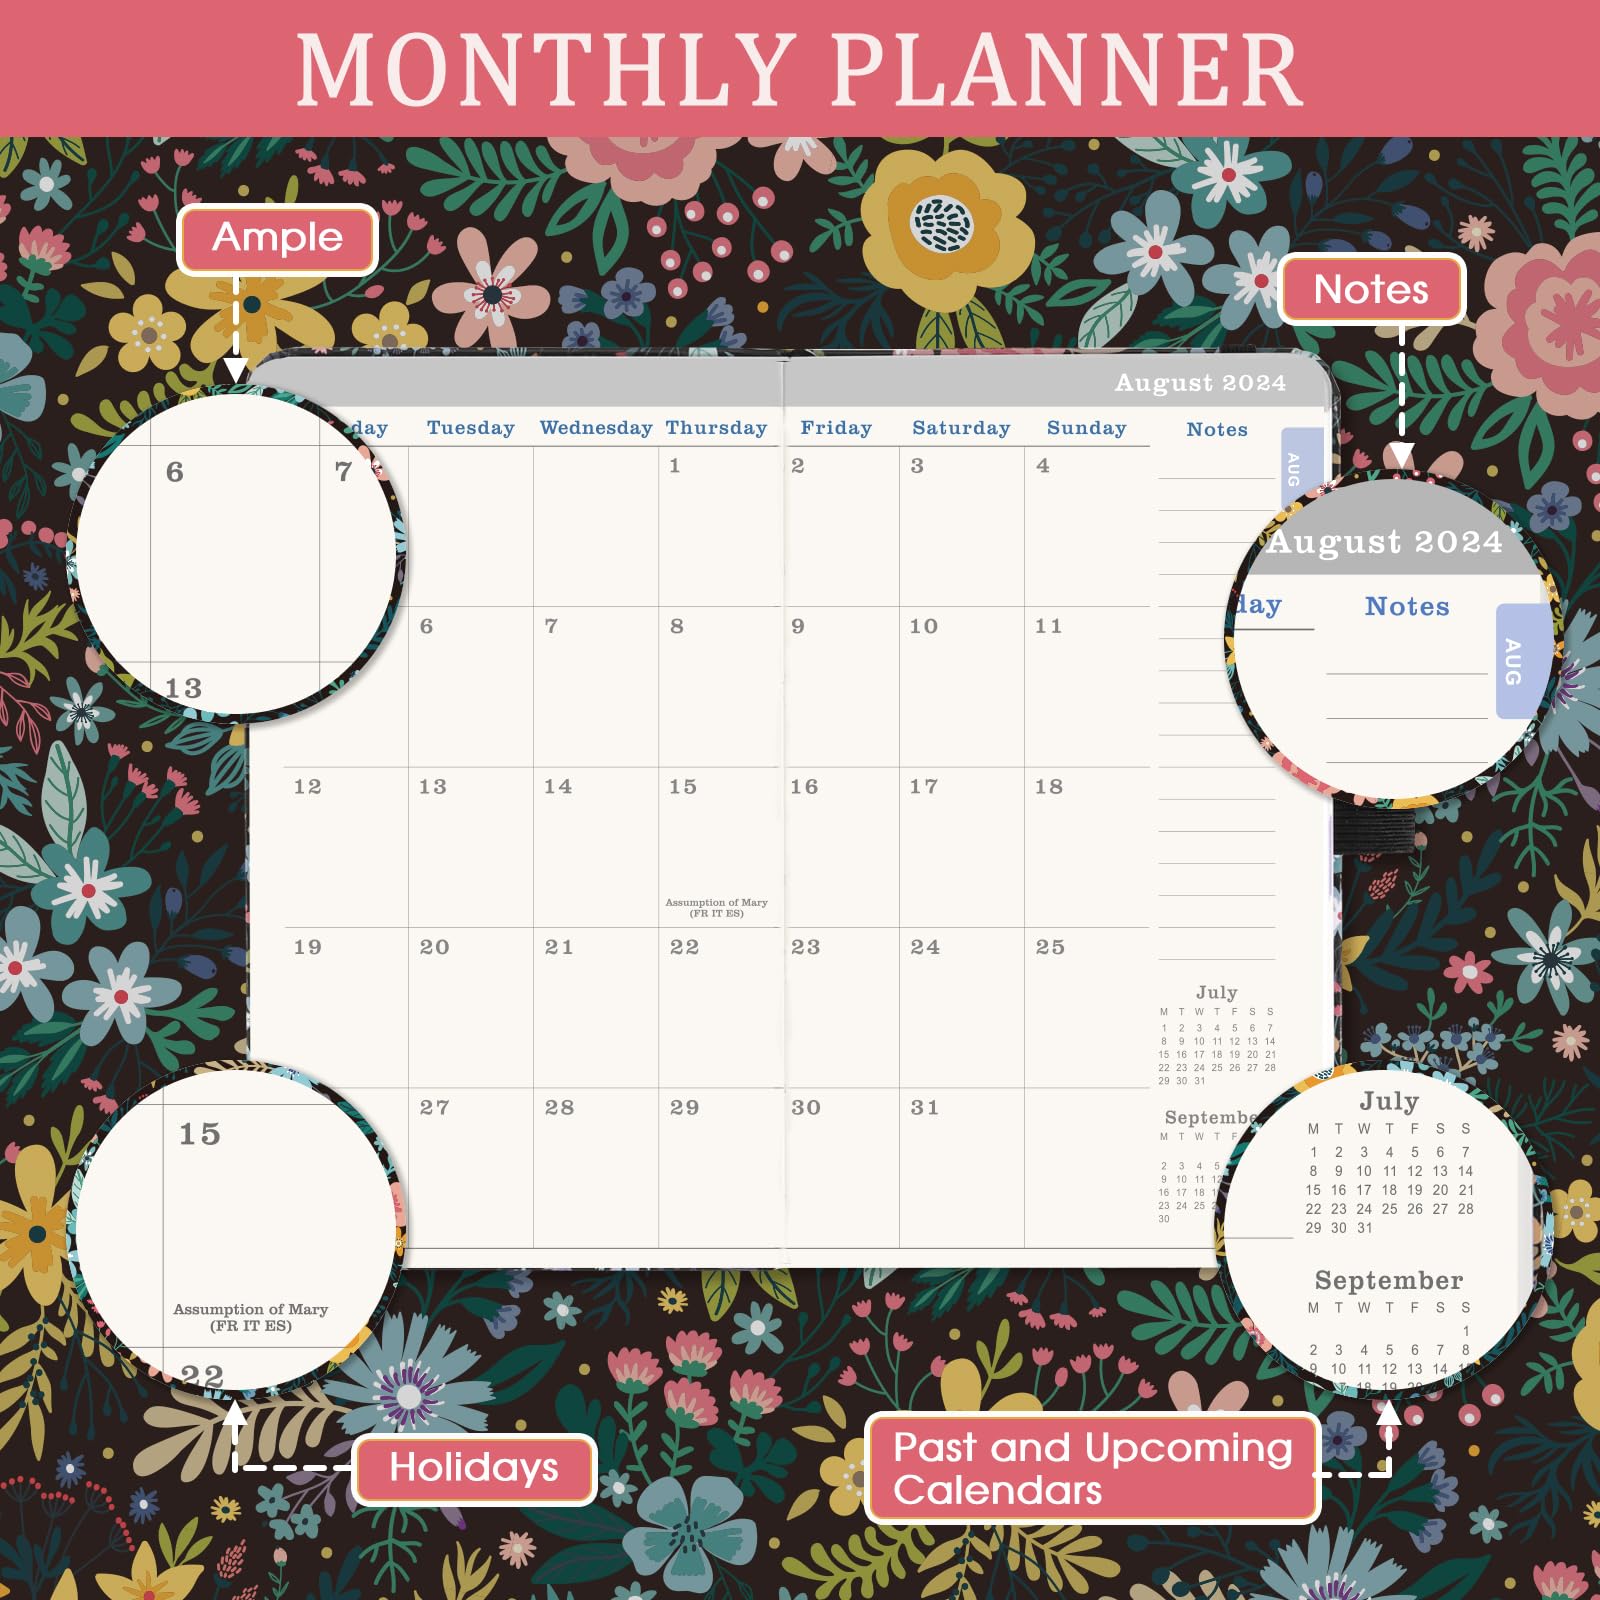 Pocket Diary 2024-2025 - Weekly & Monthly Pocket Diary, Pocket Diary A6 Week to View Diary from August 2024 to July 2025, Bonus Note Pages and Inner Pocket, 6.3 inches x 3.9 inches